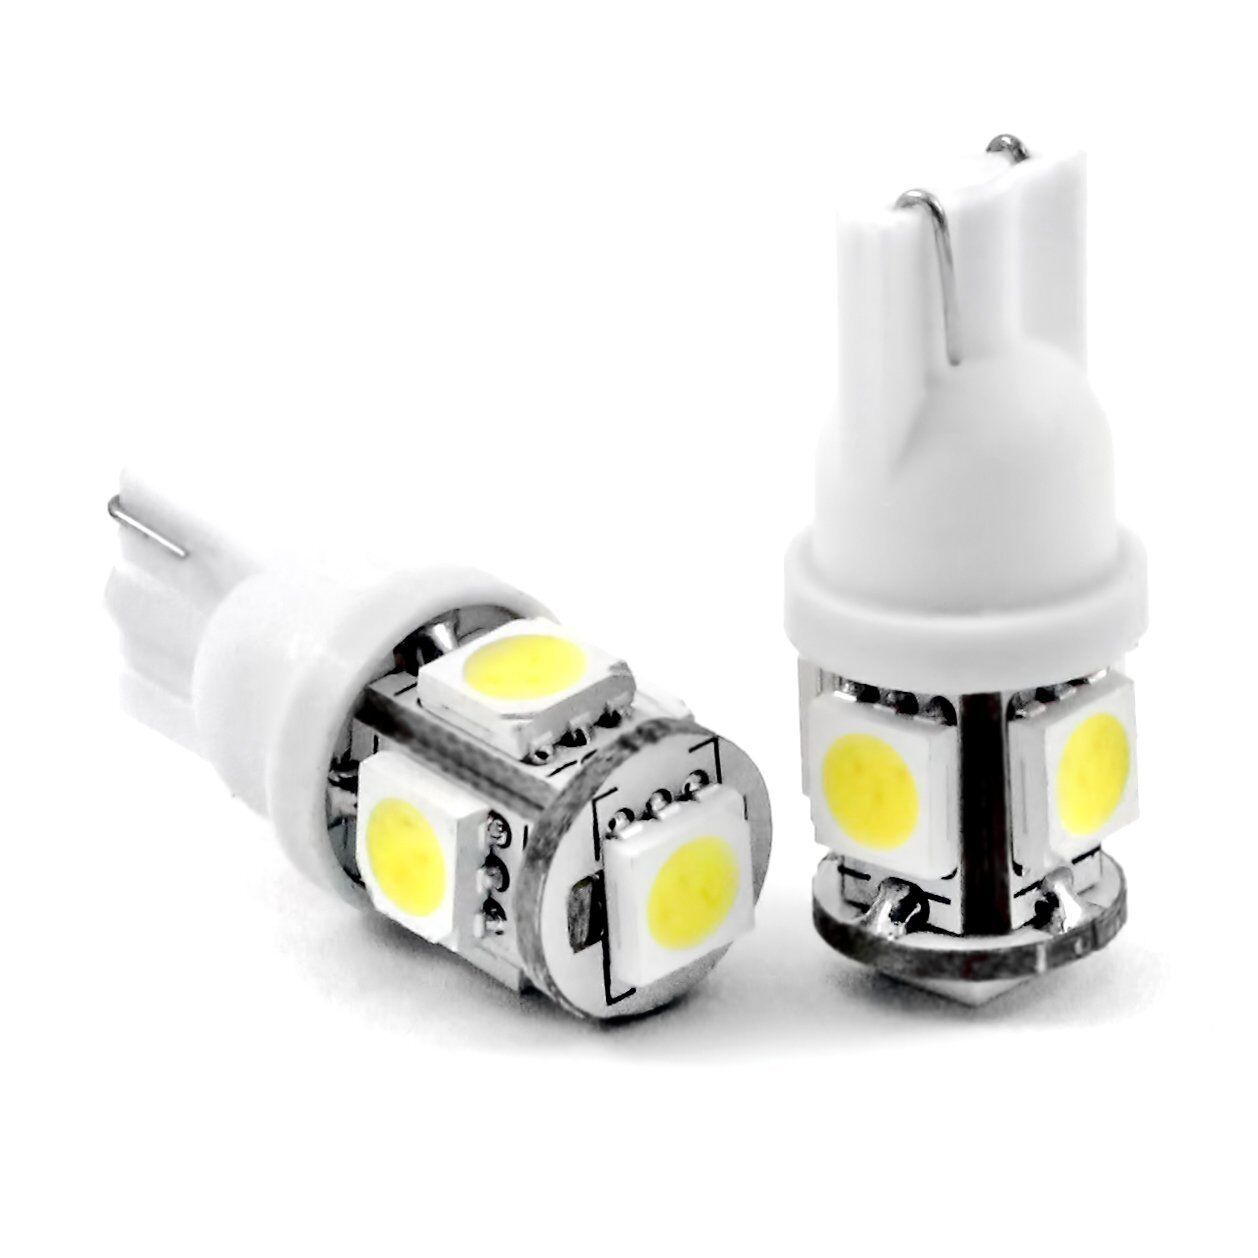 PAIR T10 360°5SMD 168 194 2825 LED Bulb fit License Plate Light Xenon White New